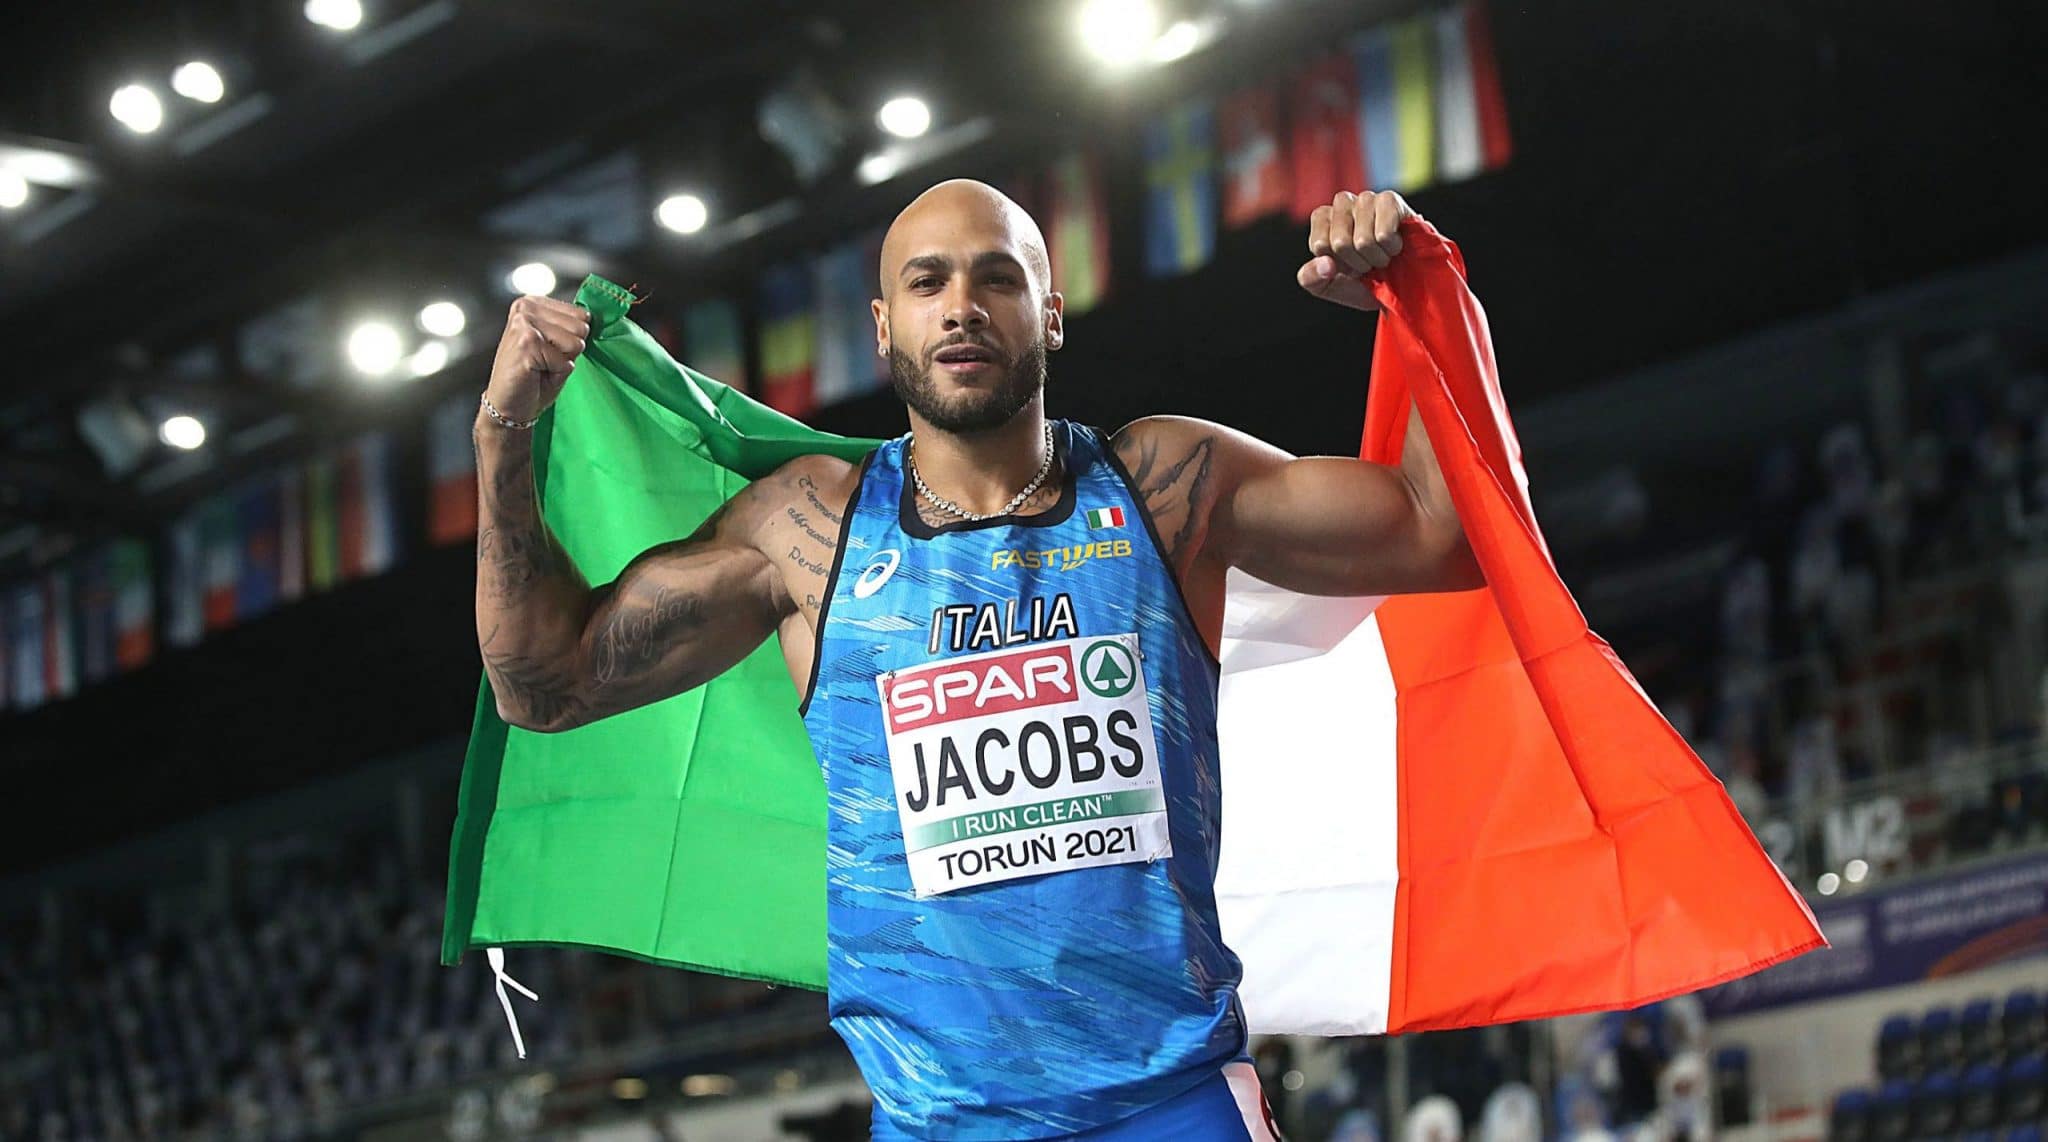 Orlen Cup di Lodz, Marcell Jacobs vince i 60 metri